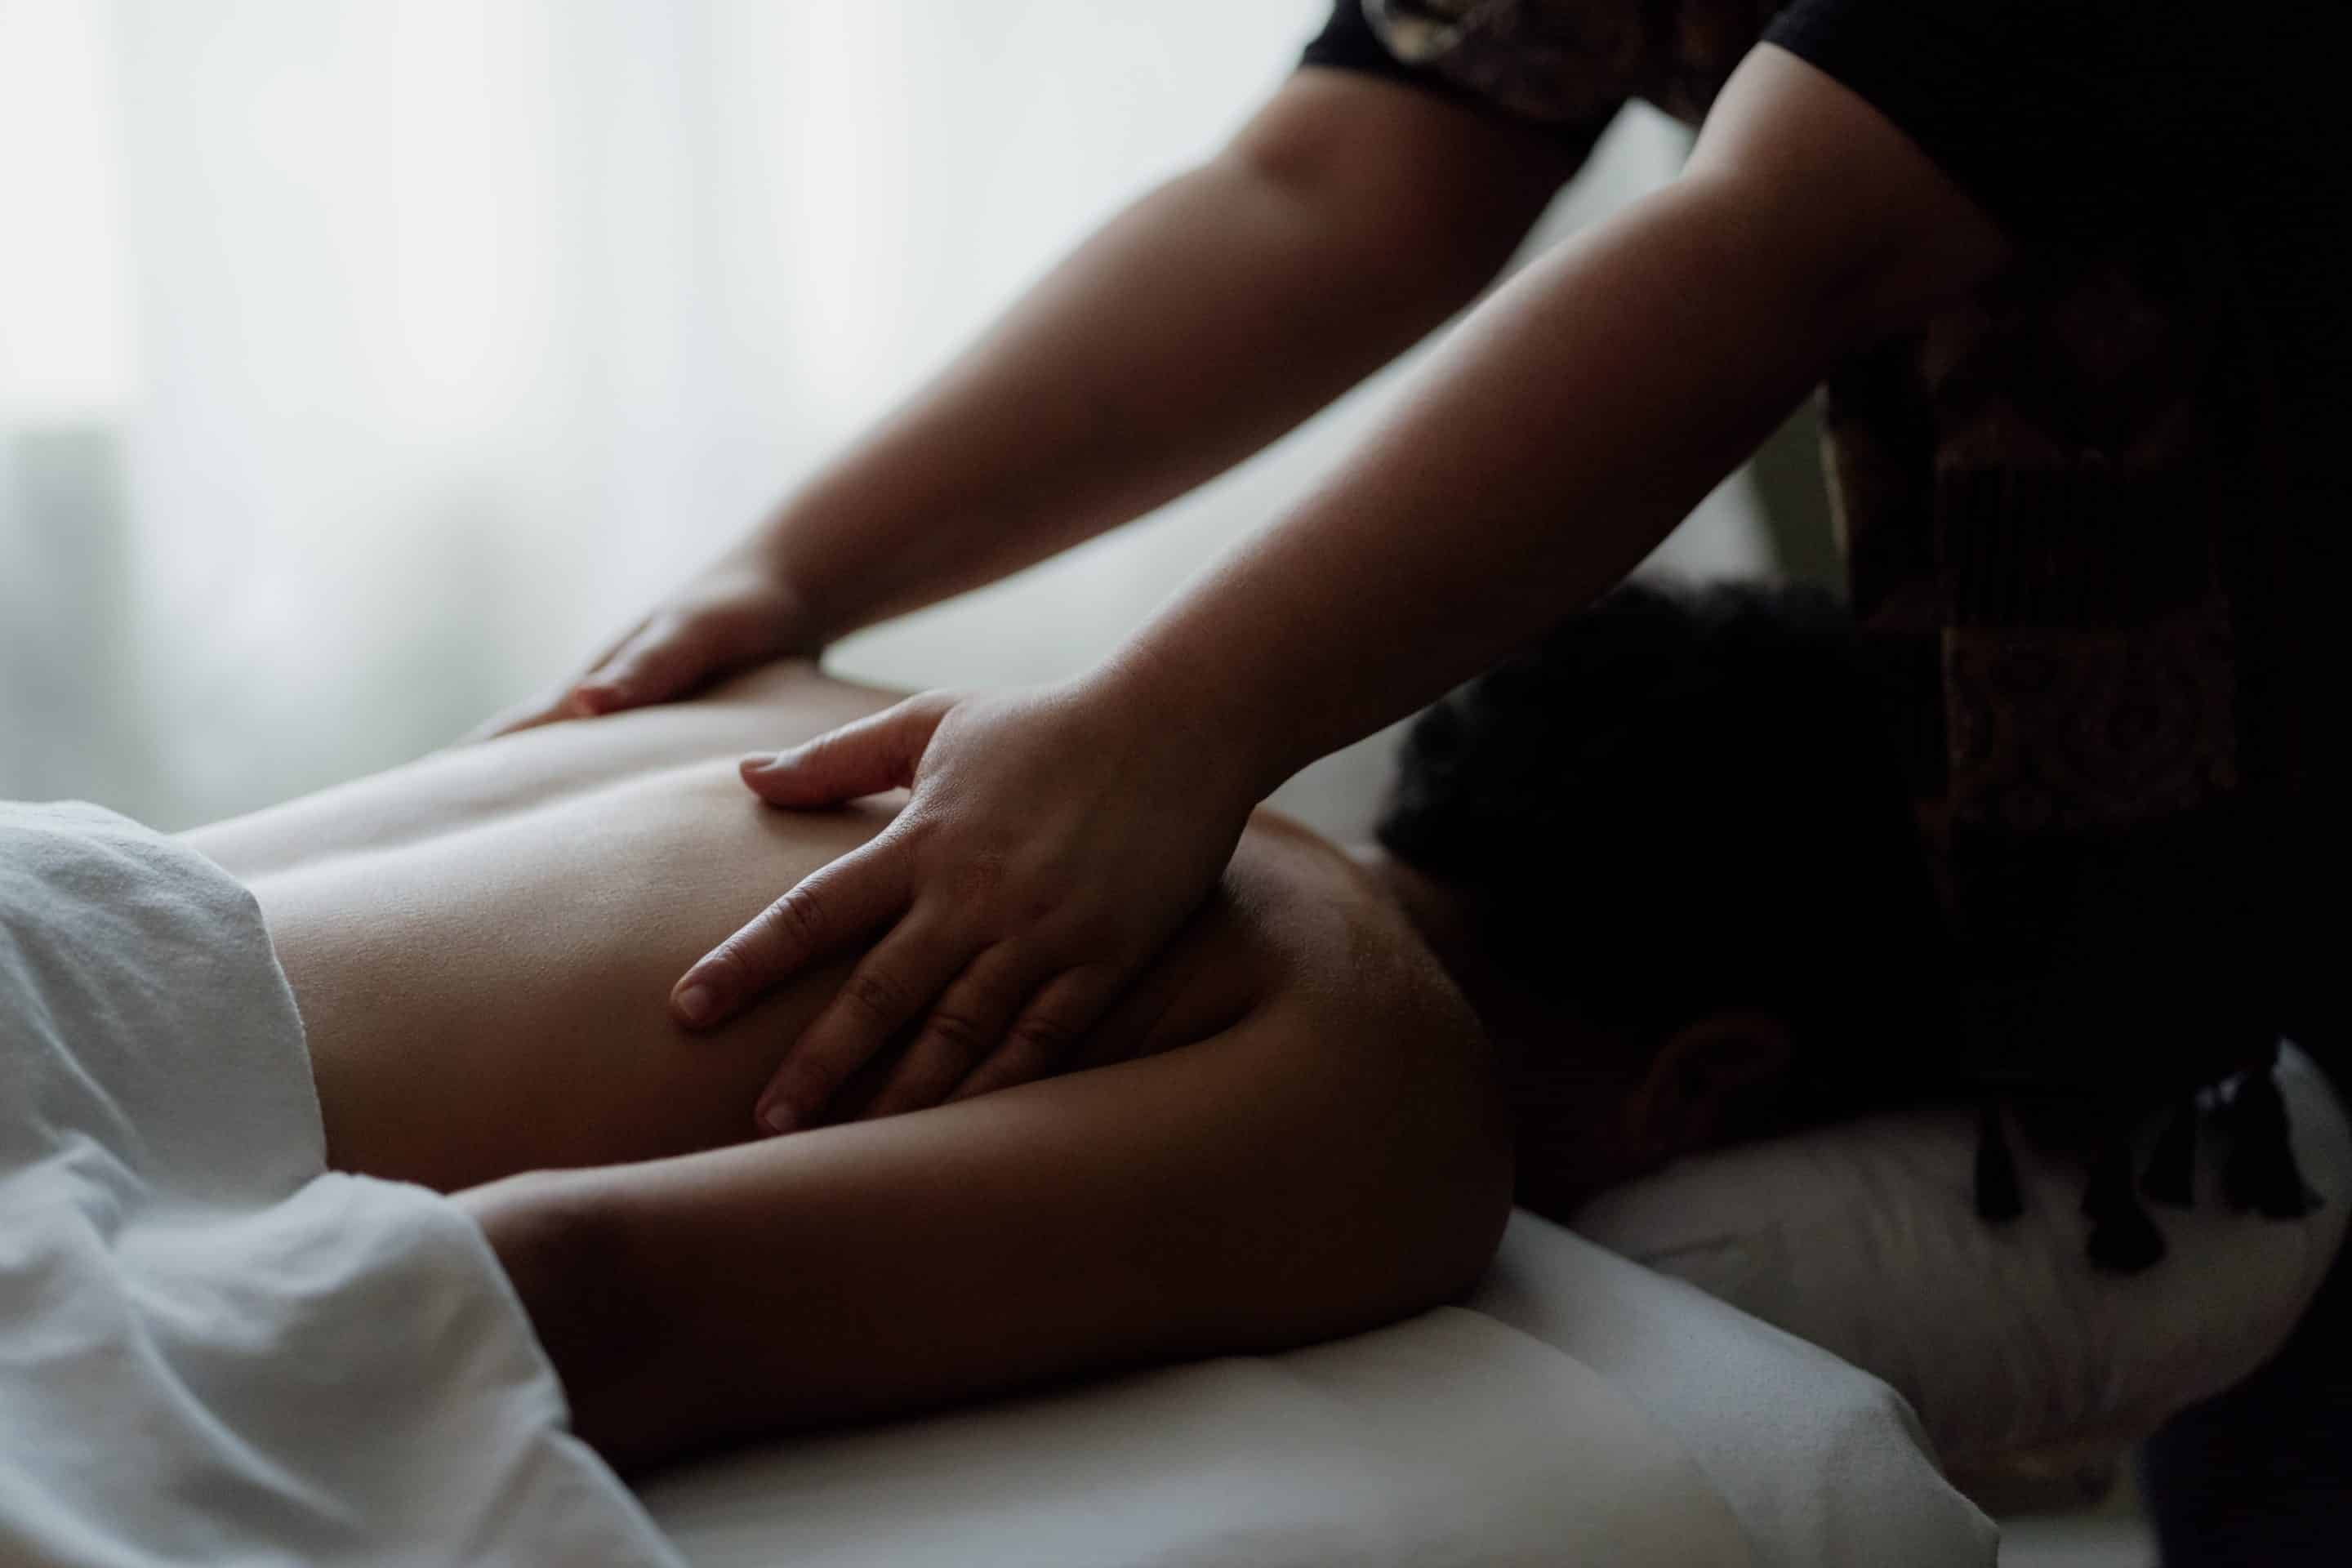 Female therapist providing a therapeutic back massage to aid in sleep quality.